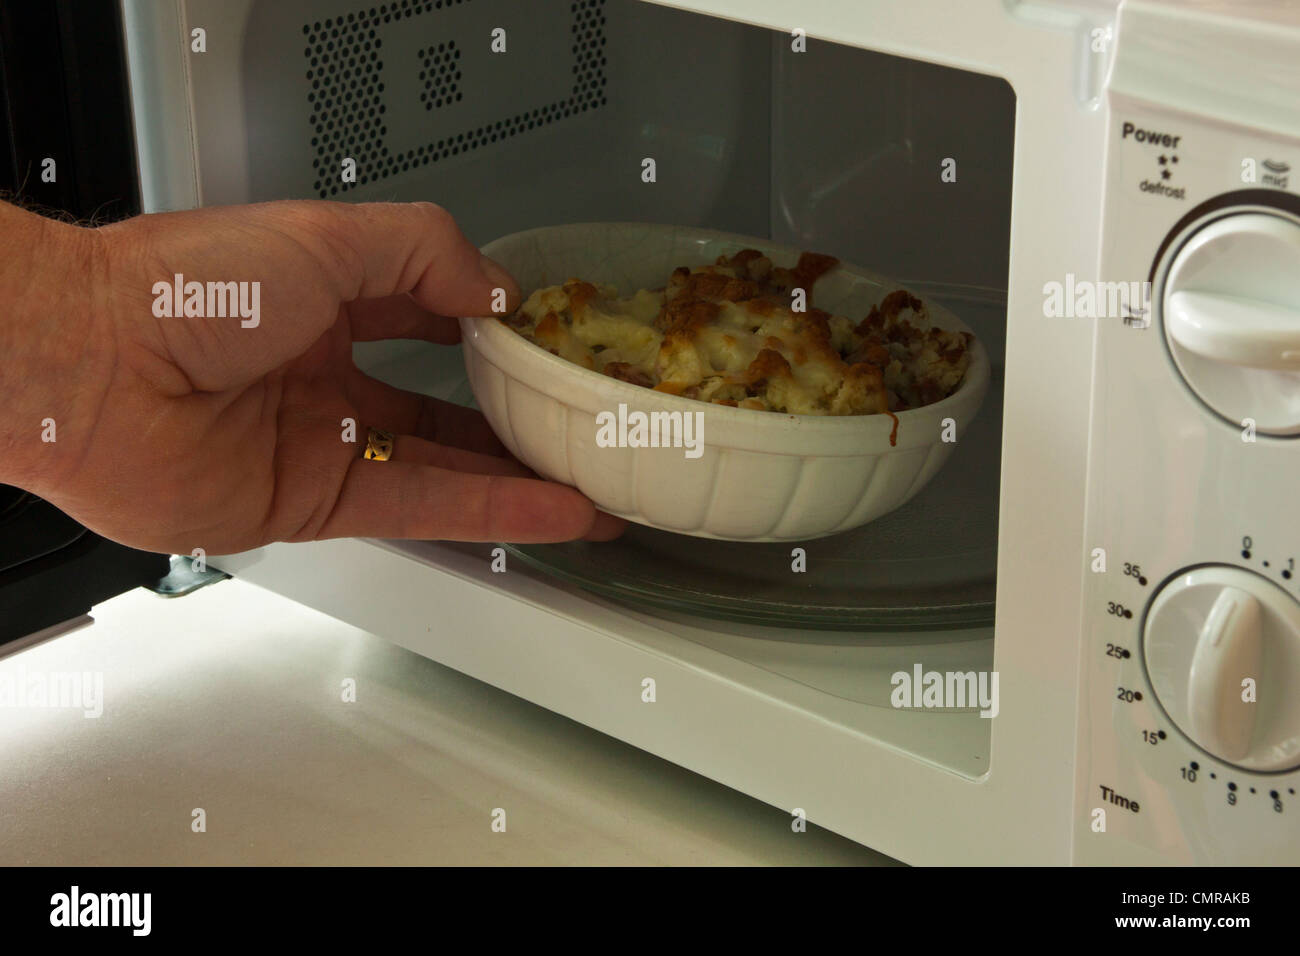 Corned Beef Hash With Cheese In Microwave Oven Stock Photo Alamy